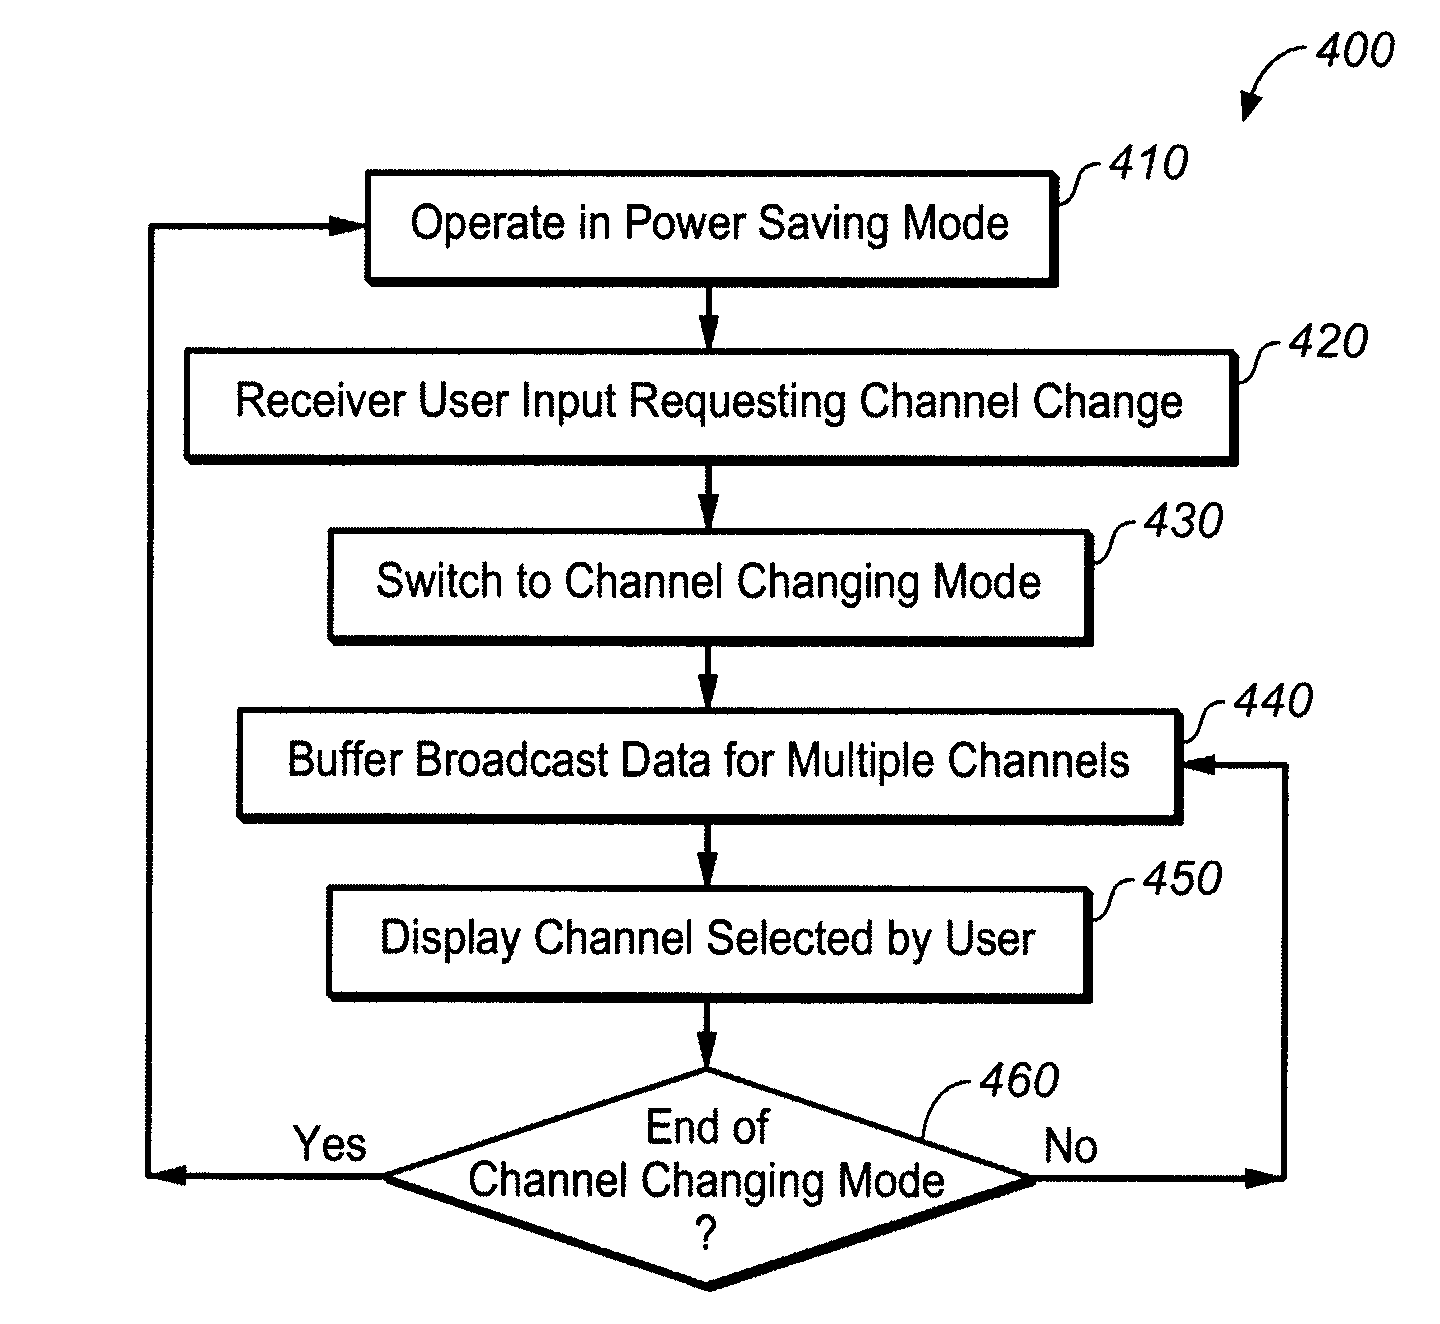 Changing channels in a digital broadcast system